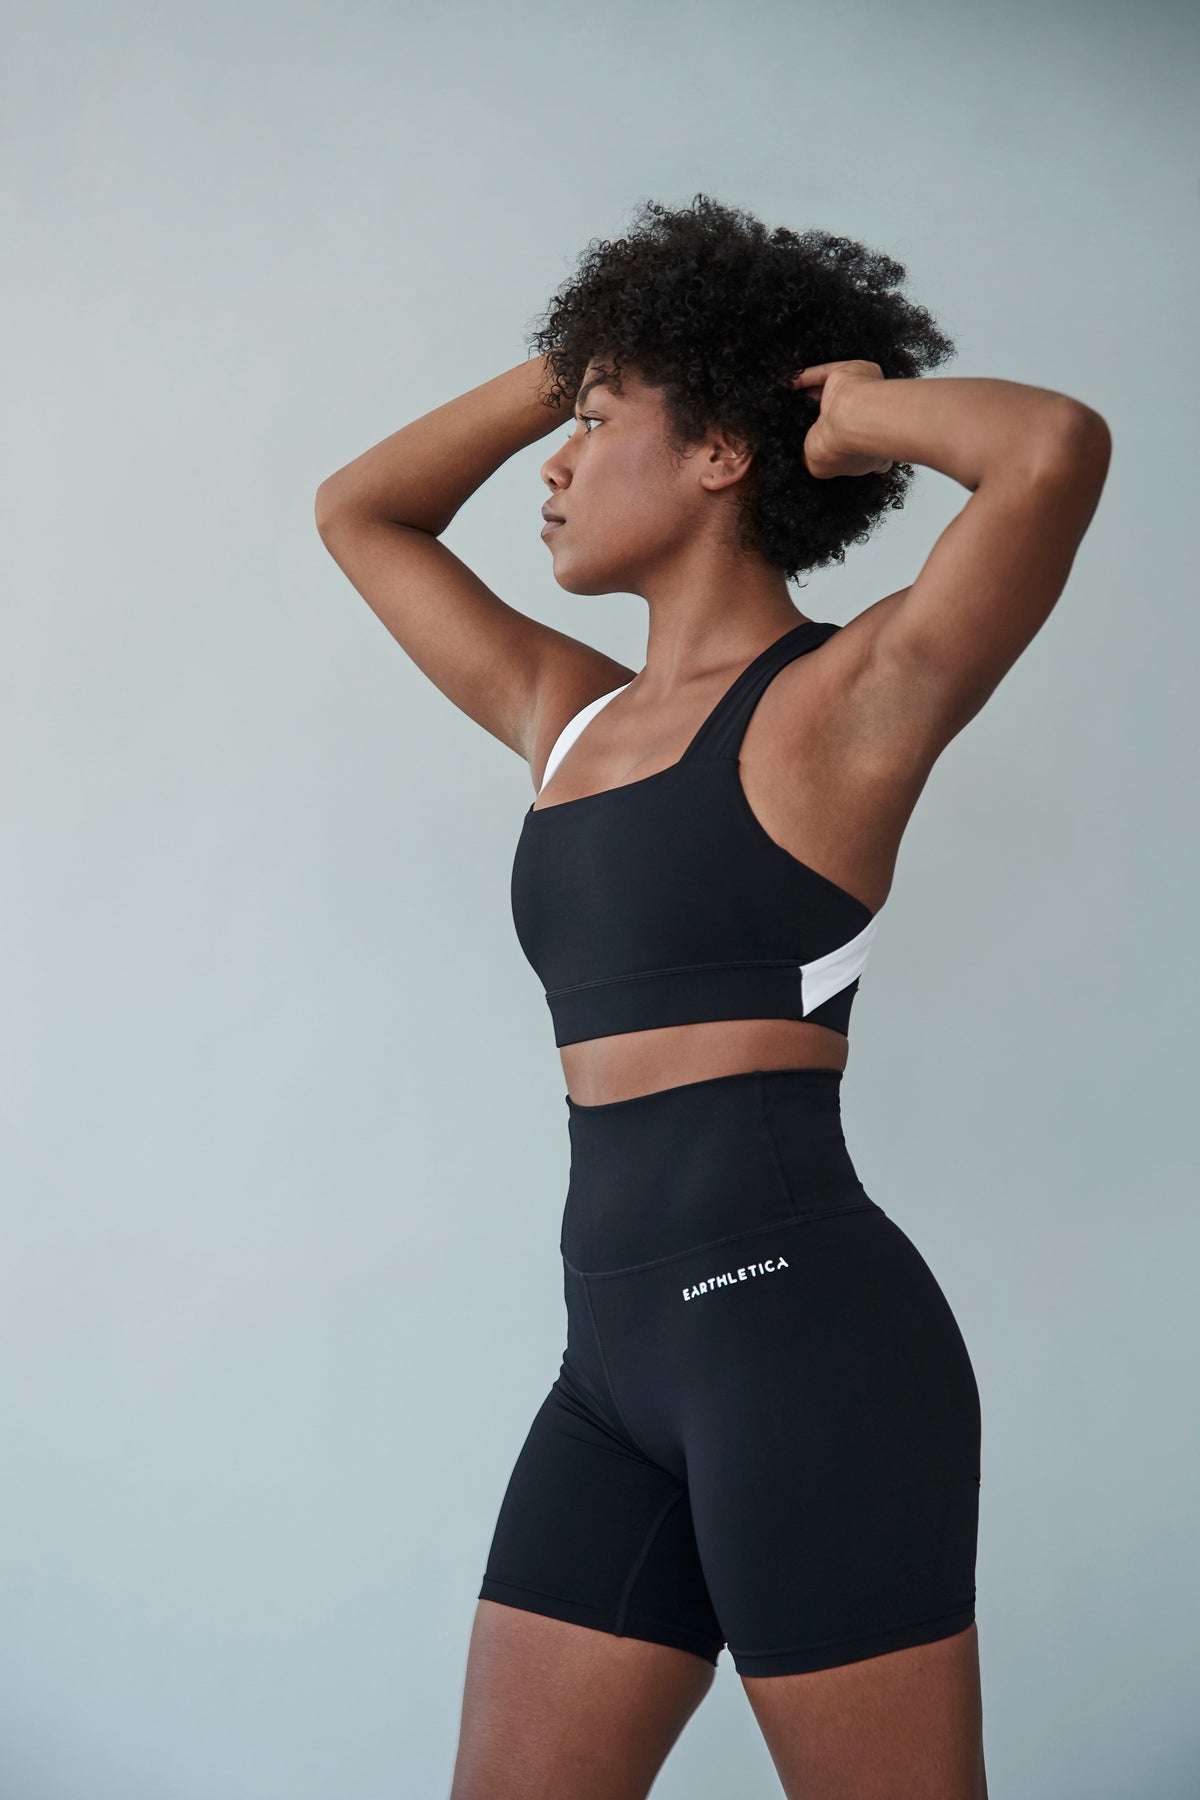 An Earthletica model wearing the Star Drop Crop + Midnight Bike Shorts activewear set. She is photographed from the side, with her arms raised above her head.